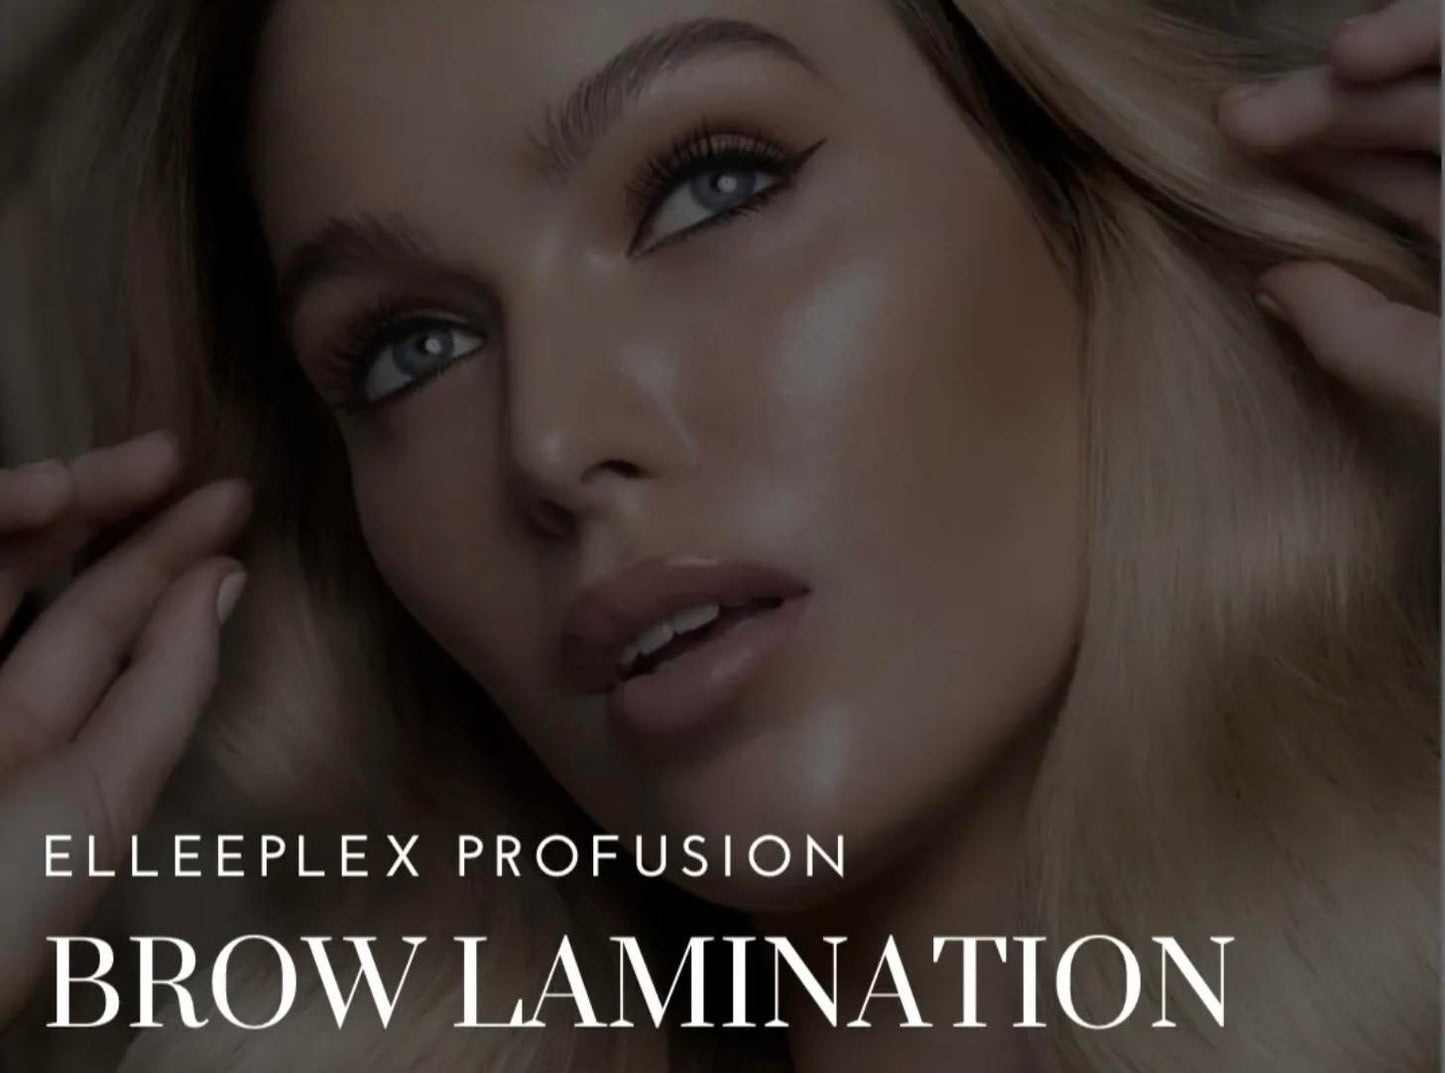 Elleebana Official Elleeplex Profusion Brow Lamination In Person Certification and Training with CE / CEU continuing education hours for estheticians and cosmetologists.